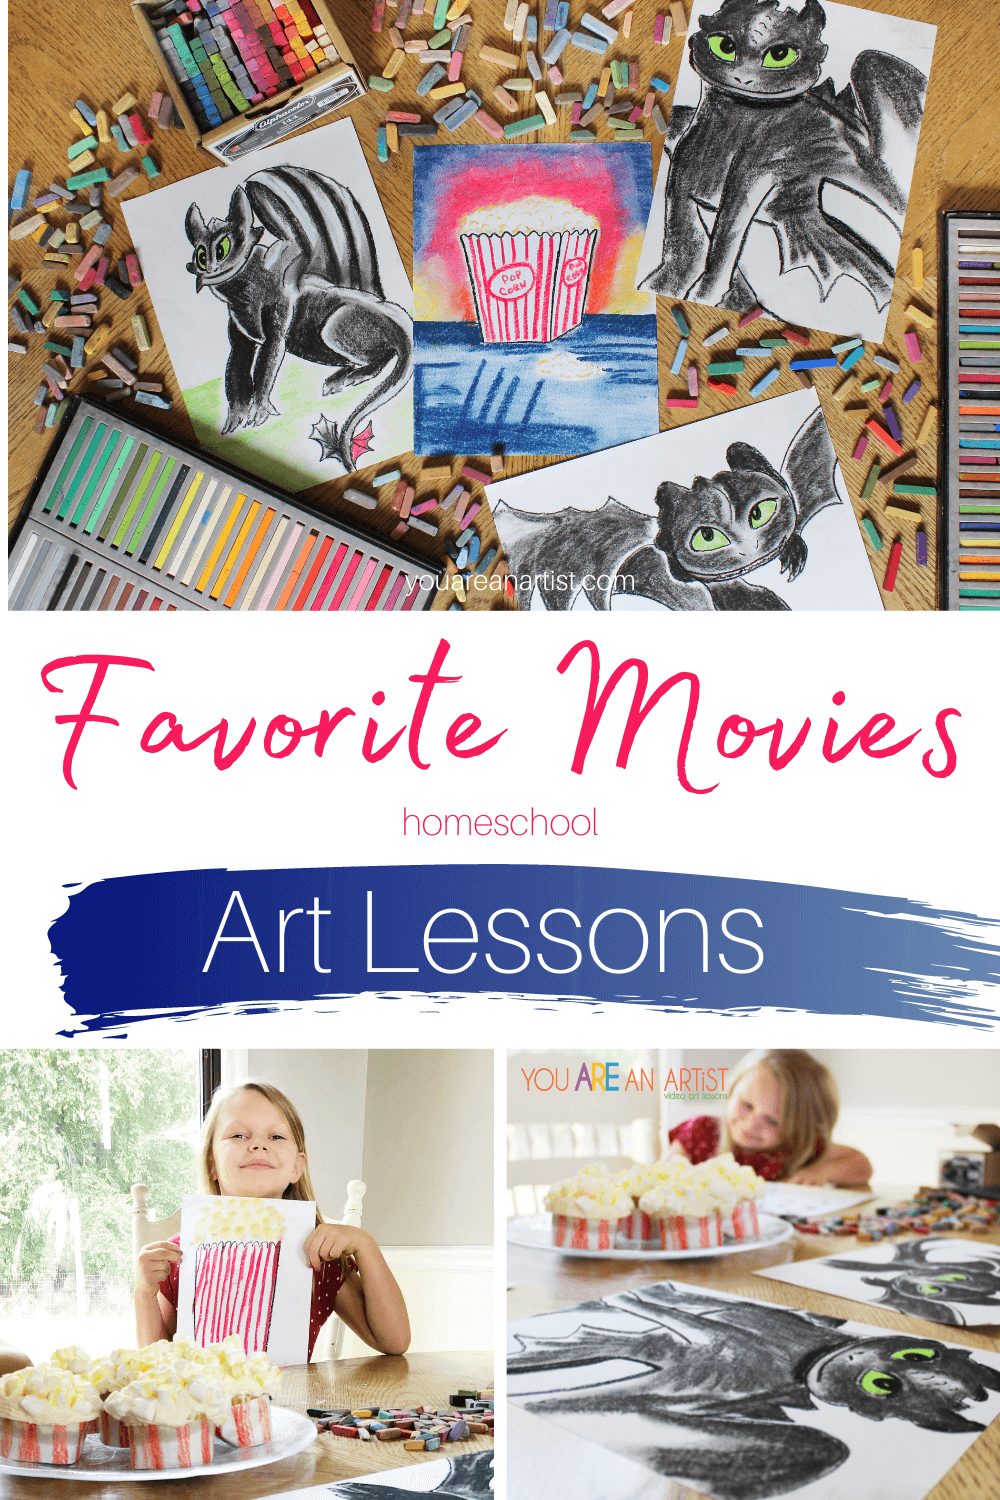 Favorite Movies Homeschool Art Lessons: Don't let family movie night become boring! Bring some excitement back with these chalk pastel art lessons. All you'll need is a pack of construction paper and a set of chalk pastels. So grab your favorite movie snacks or make some of your own and join Nana for some of your family's favorite movies. #familymovienight #chalkpastelartlessons #familymovienightartlessons #familymovieartlessons #favoritemovieshomeschoolartlessons #chalkpastelmovieartlesson #chalkpastelsatthemovies #artatthemovies 